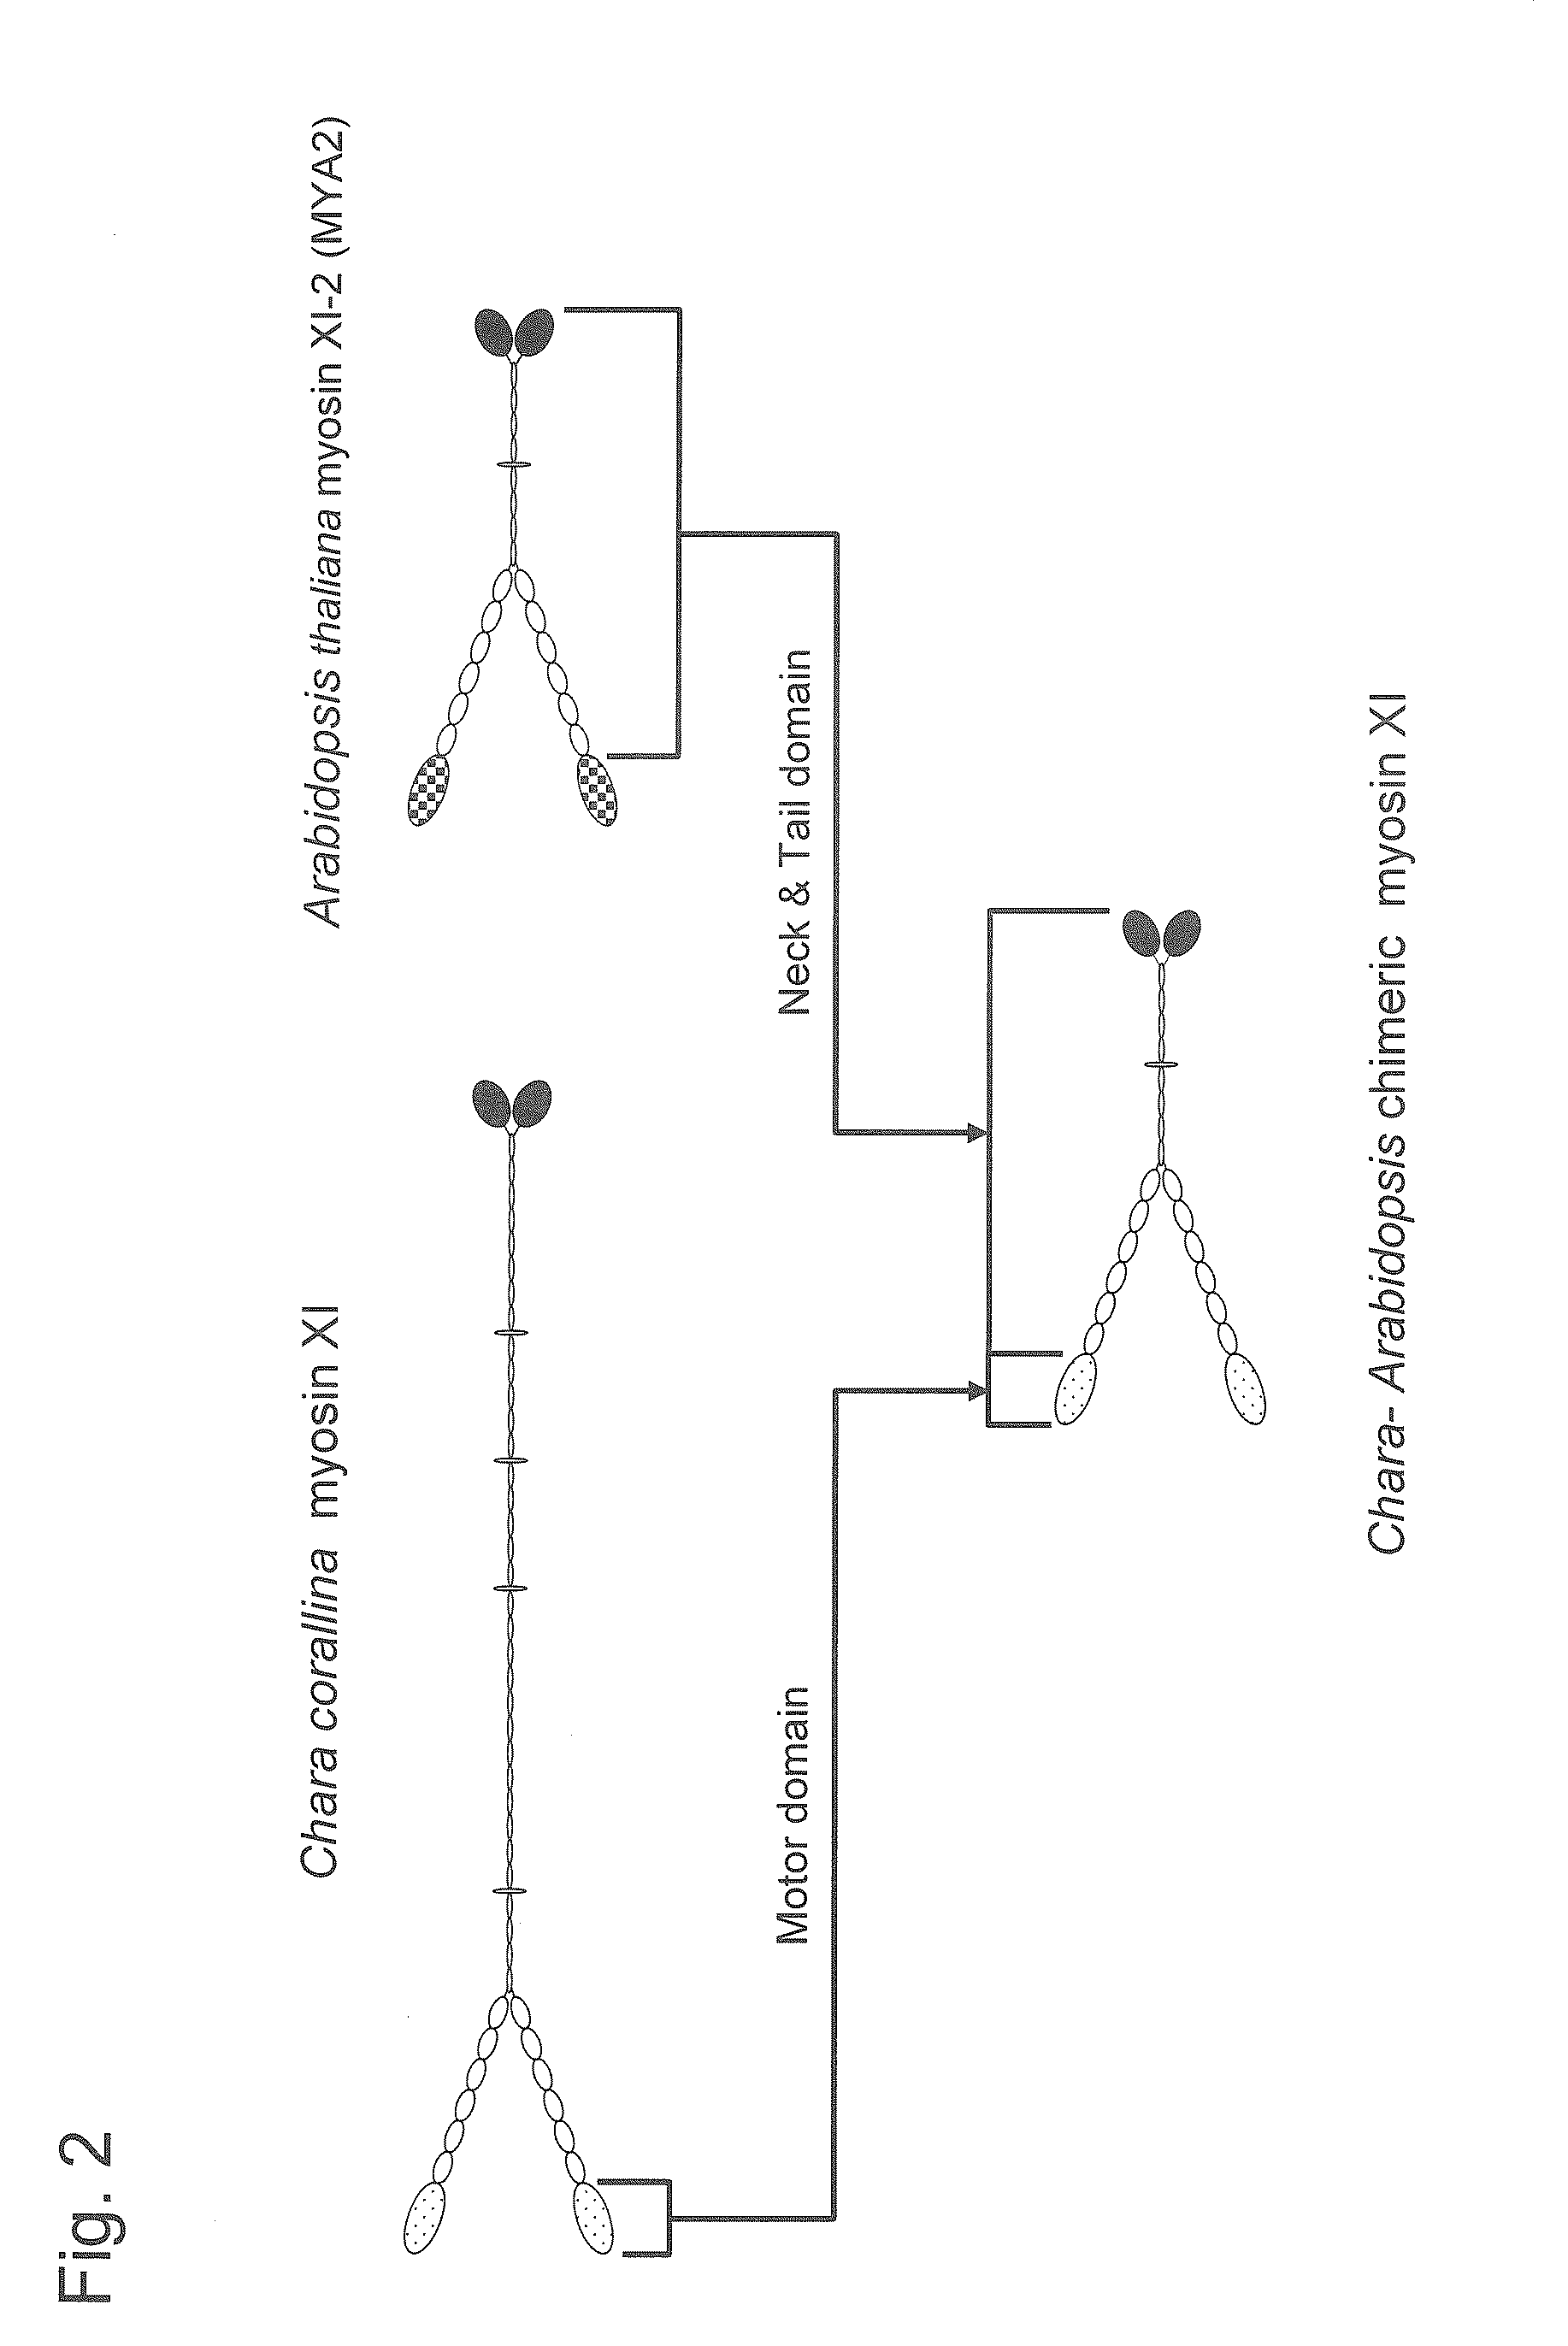 Plant with enhanced growth and method for producing the same